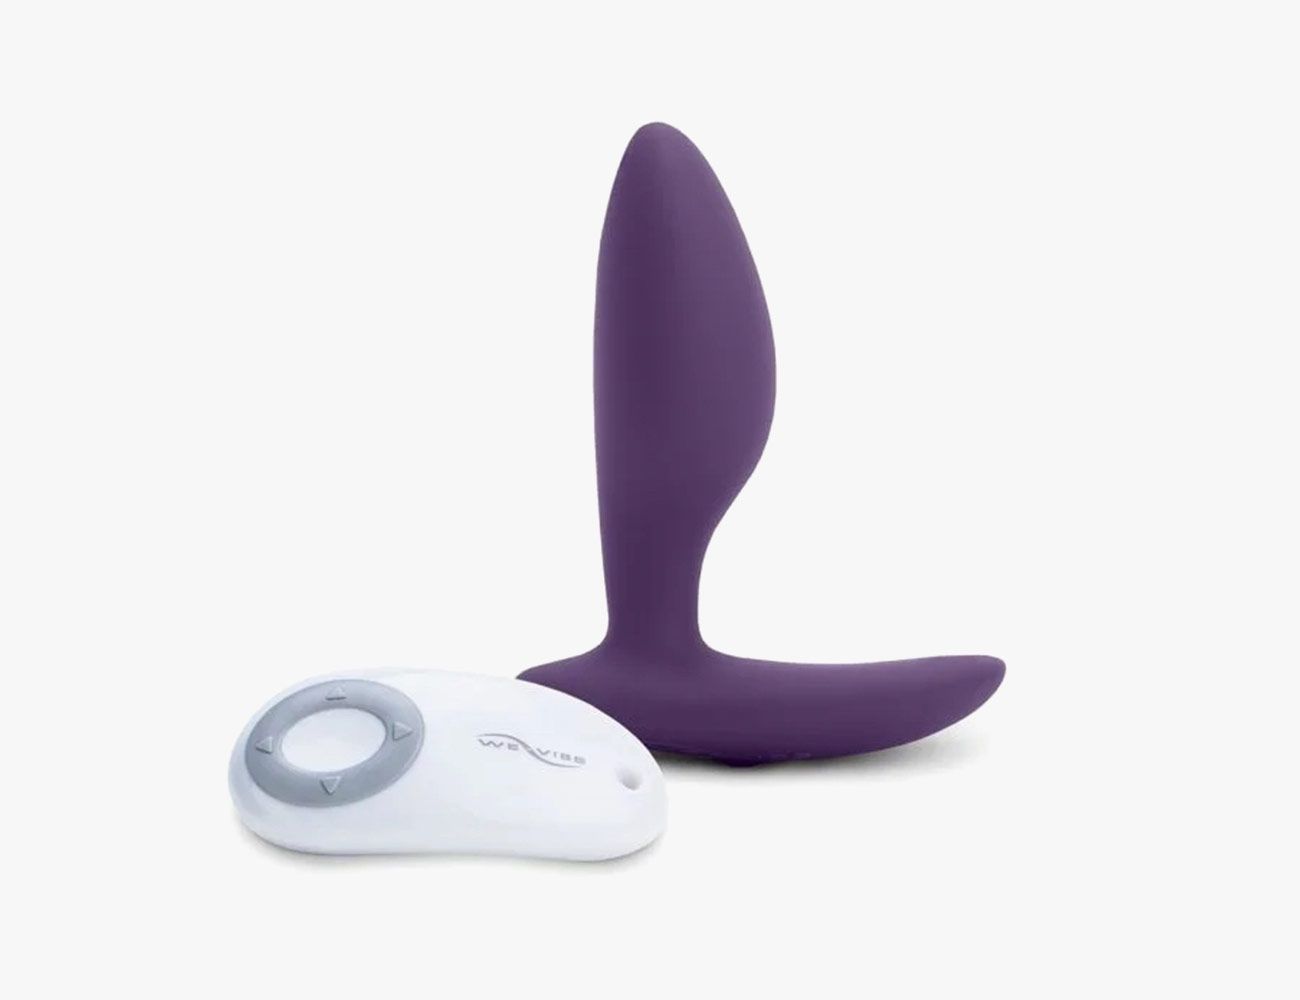 Banging my firm arse with a sex tool